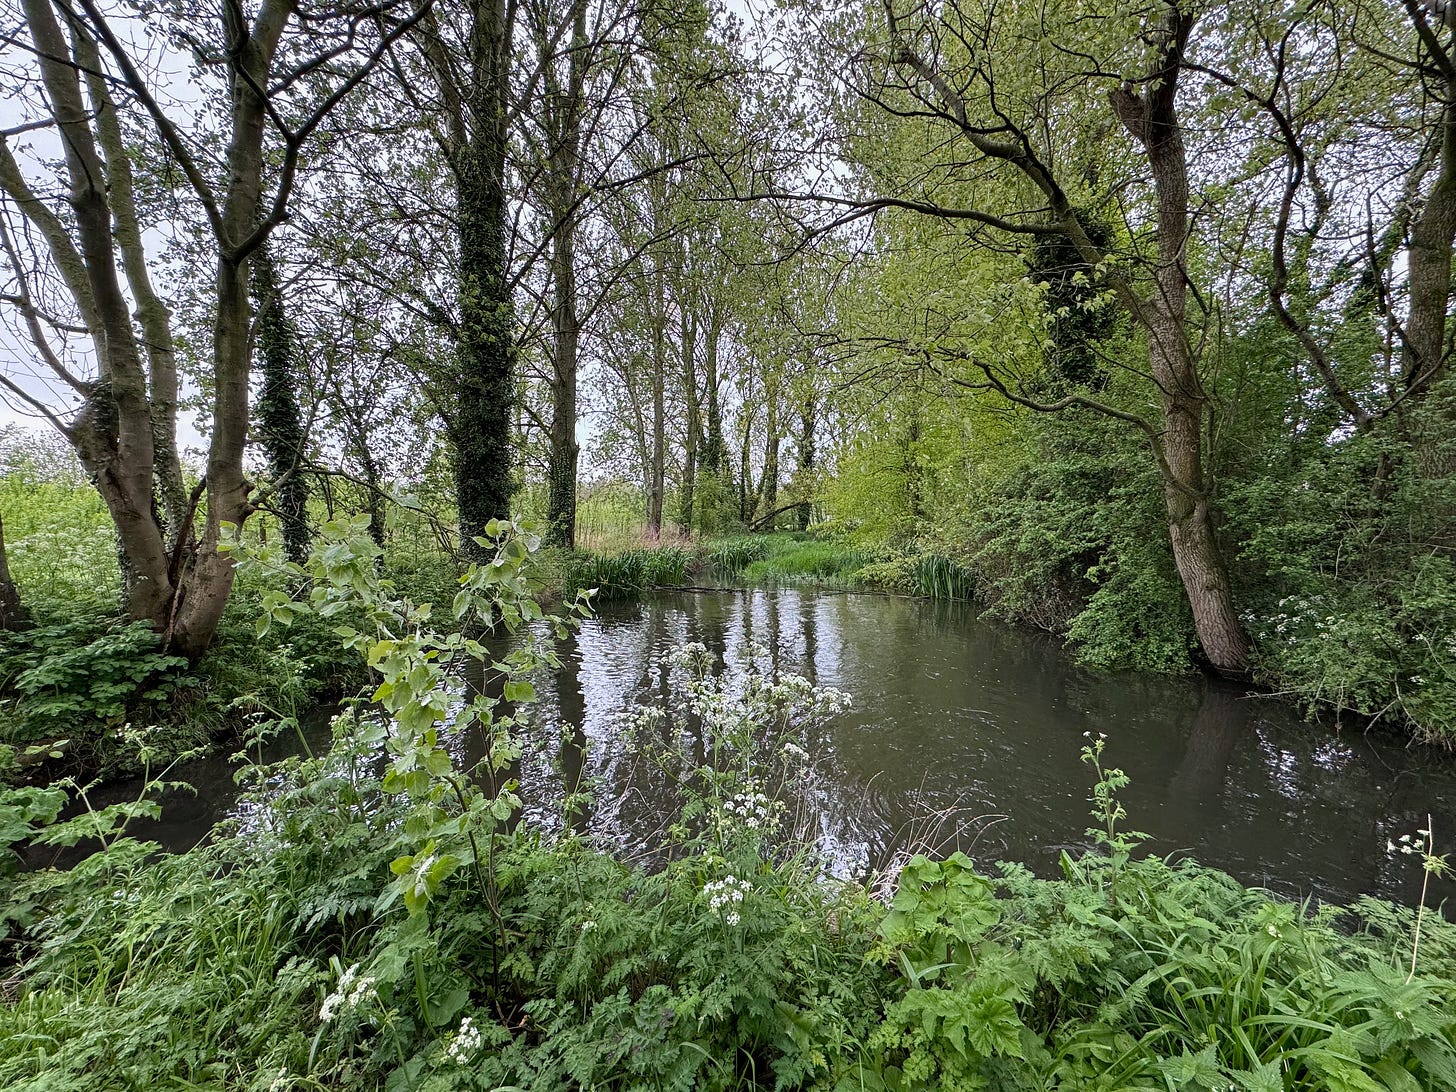 View of River Ivel. The vegetation is lush and green with cow parsley just flowering.